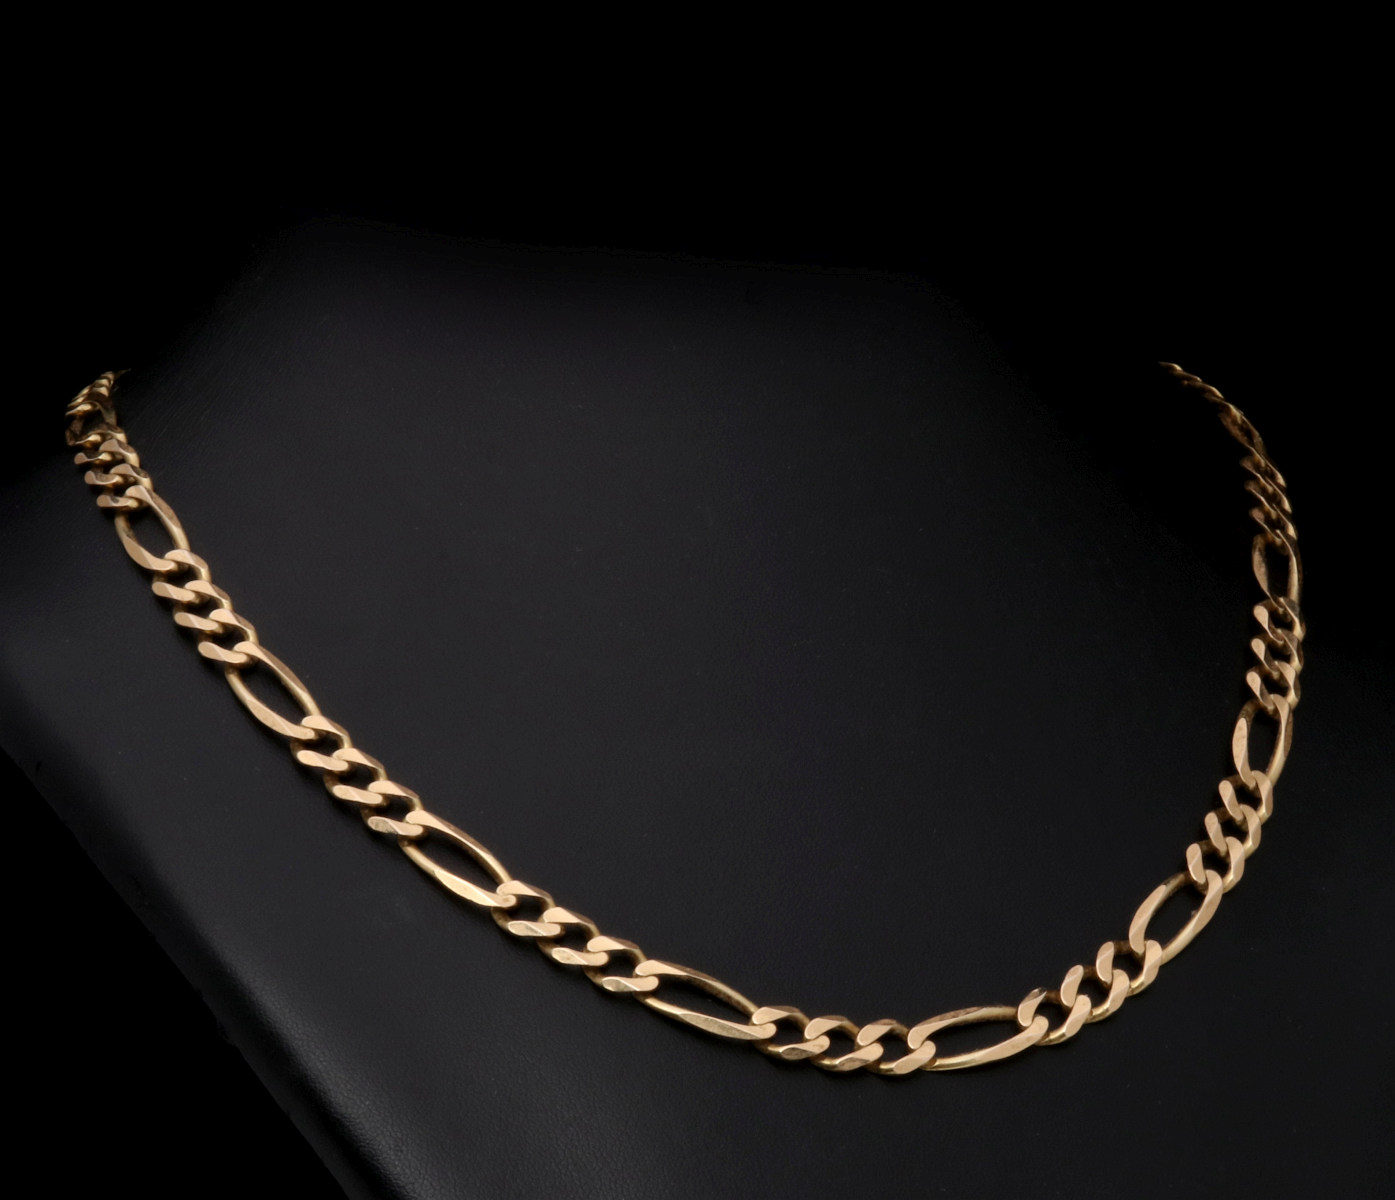 A 20-INCH 14K YELLOW GOLD CURB CHAIN NECKLACE